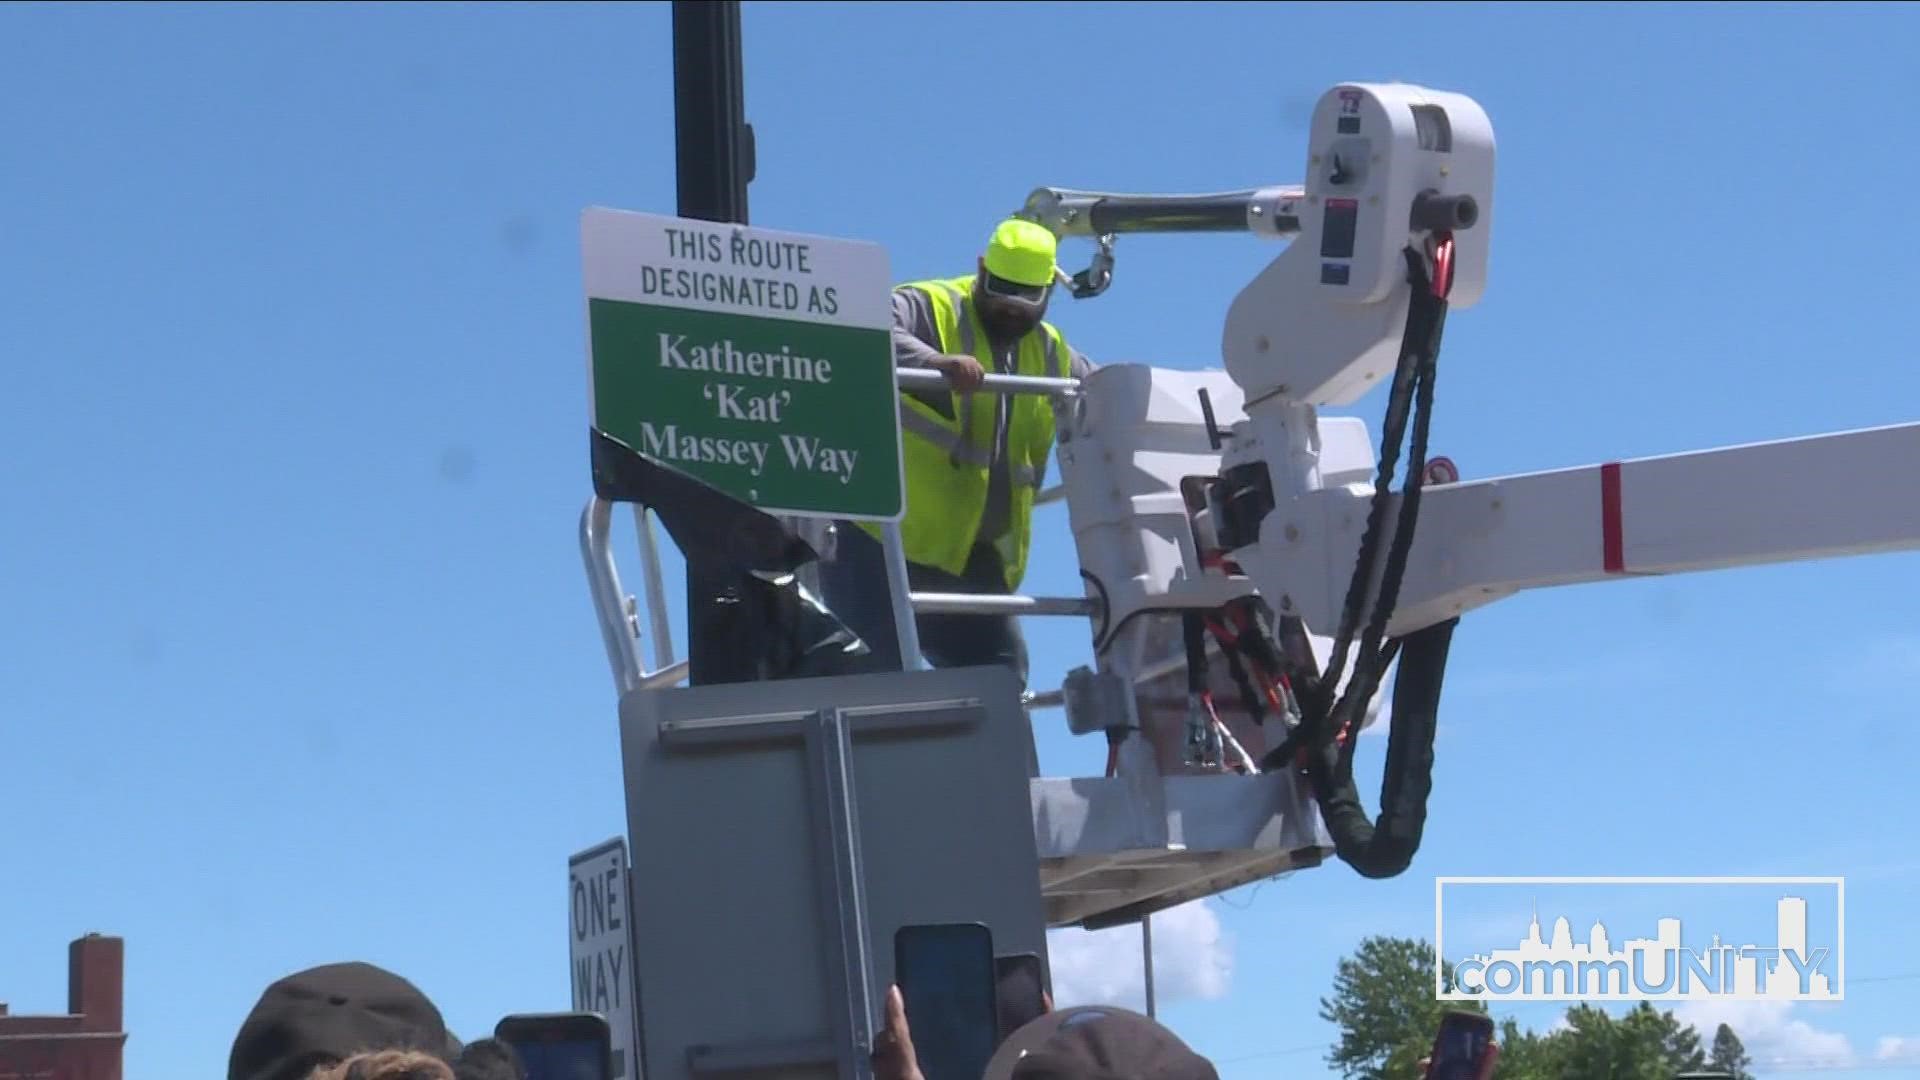 A trailblazer sign was dedicated on Jefferson Avenue in honor of Katherine "Kat" Massey.